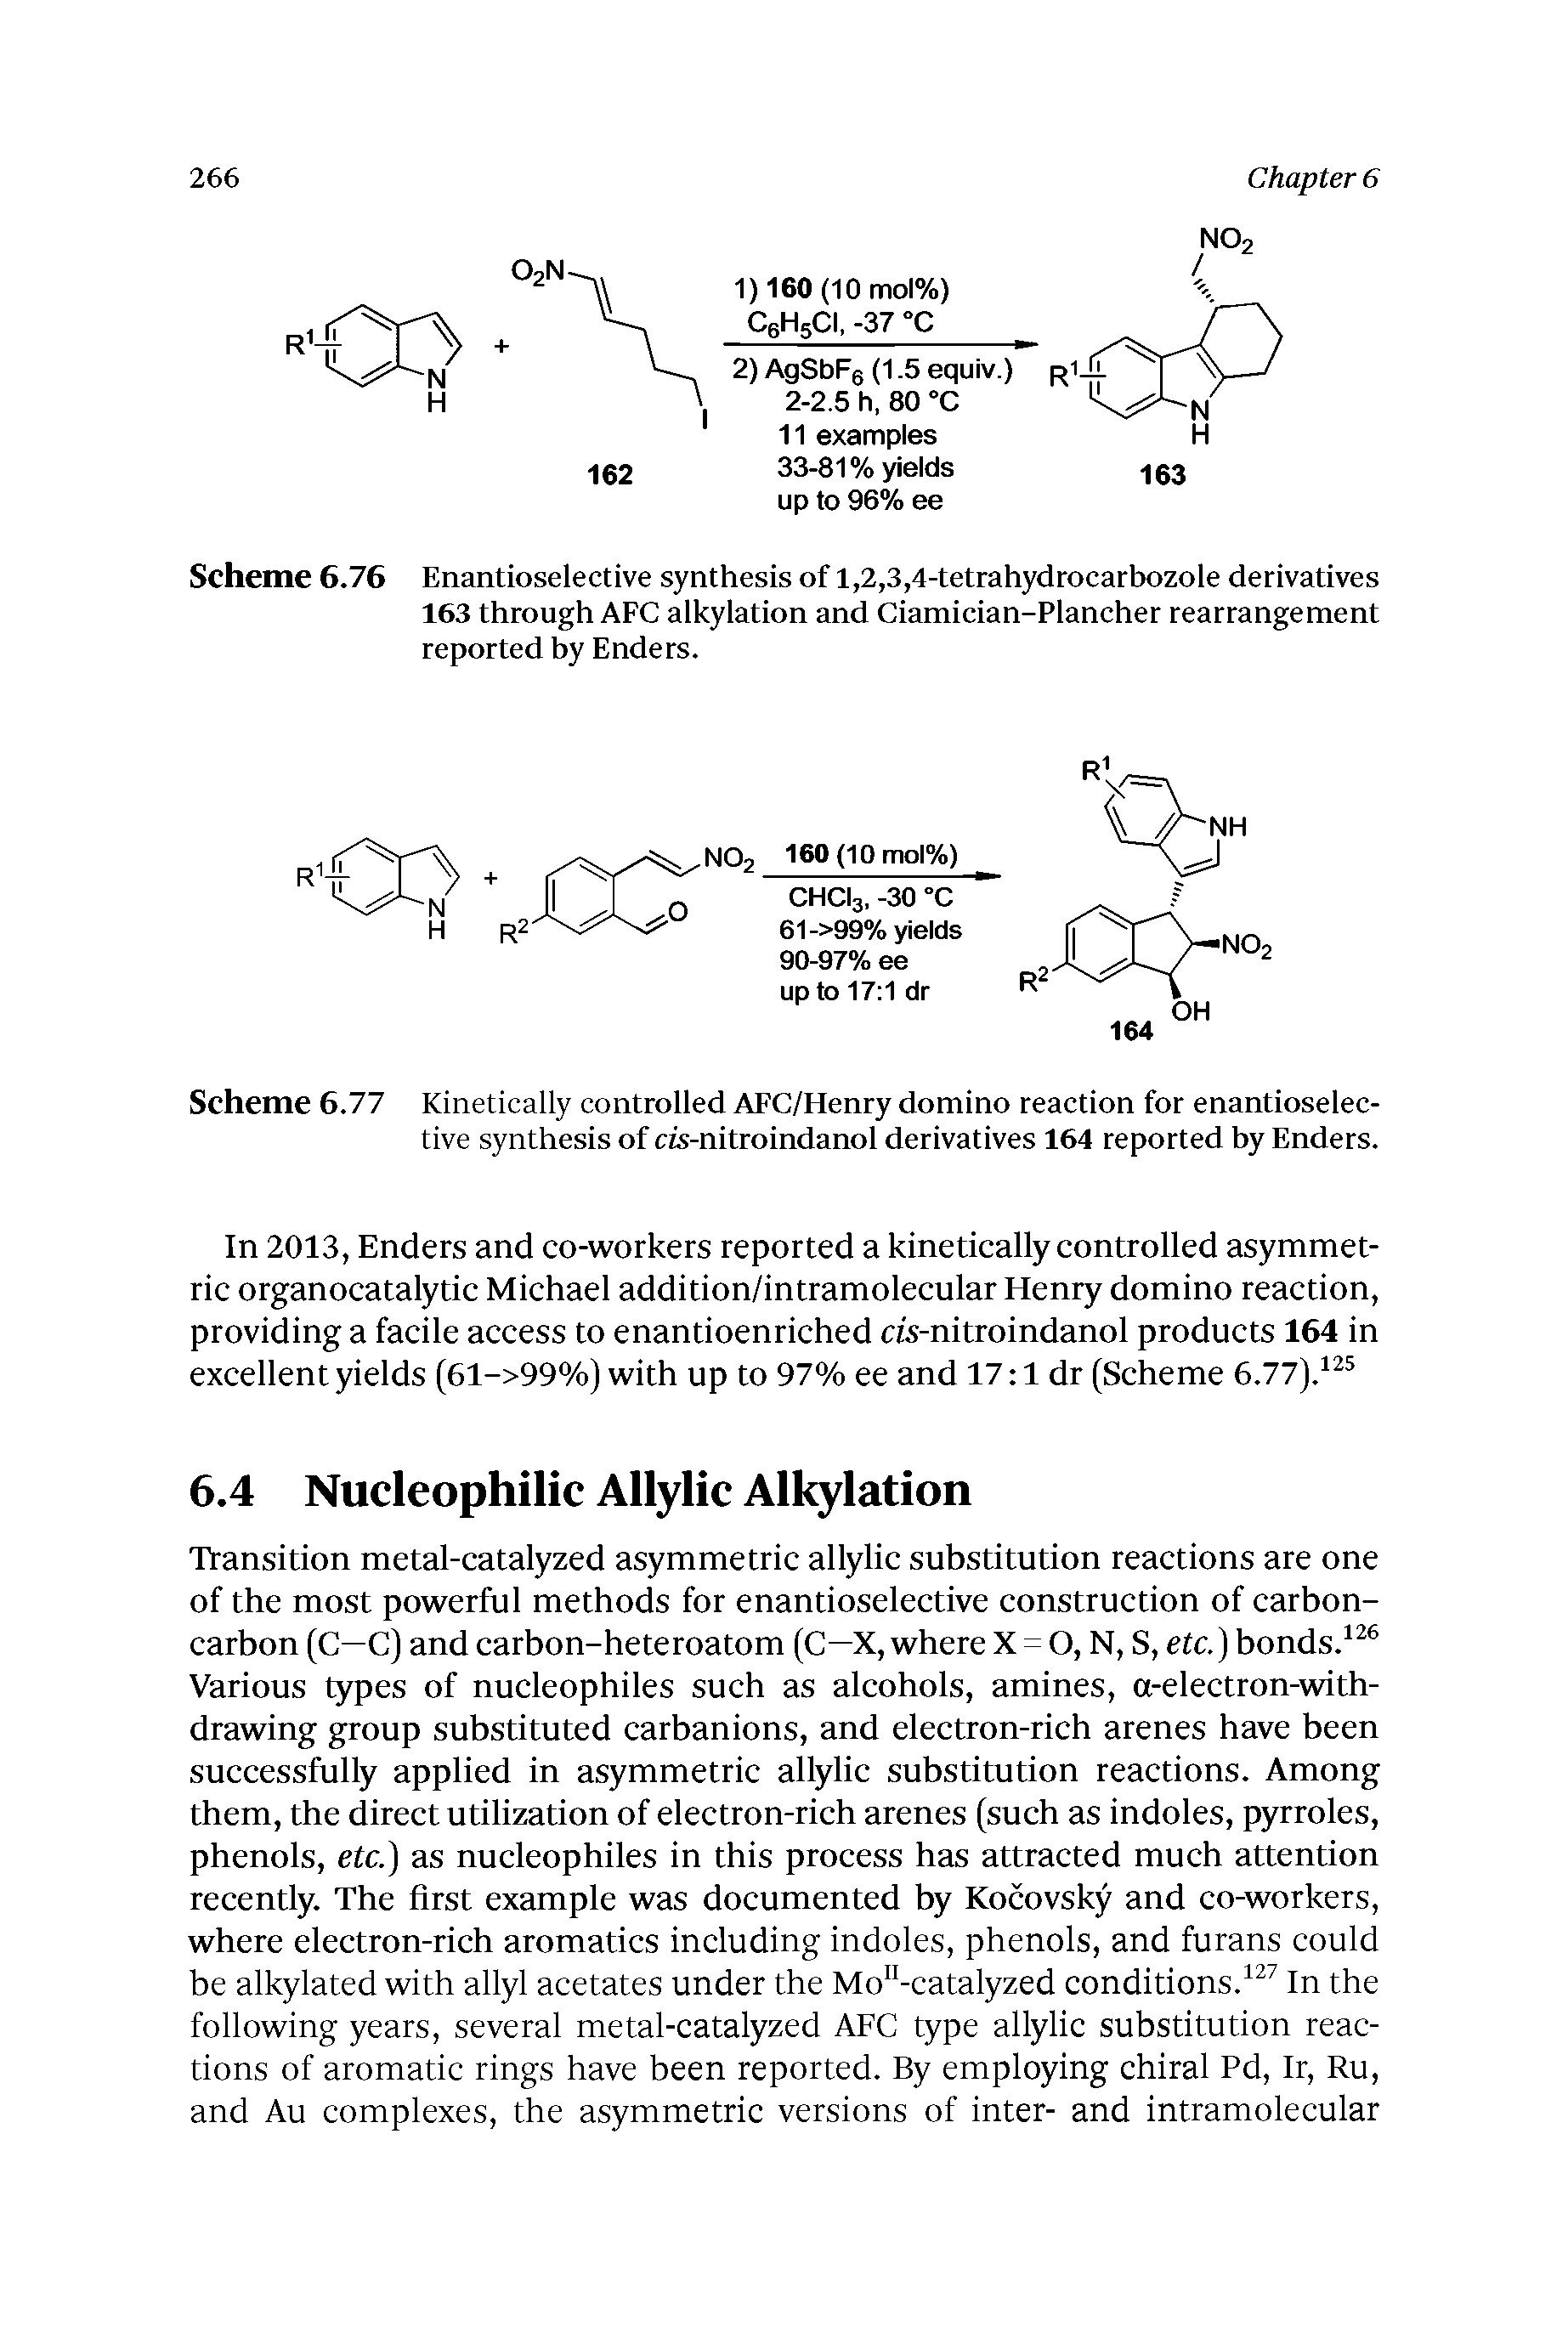 Scheme 6.76 Enantioselective synthesis of 1,2,3,4-tetrahydrocarbozole derivatives 163 through AFC alkylation and Ciamician-Plancher rearrangement reported hy Enders.